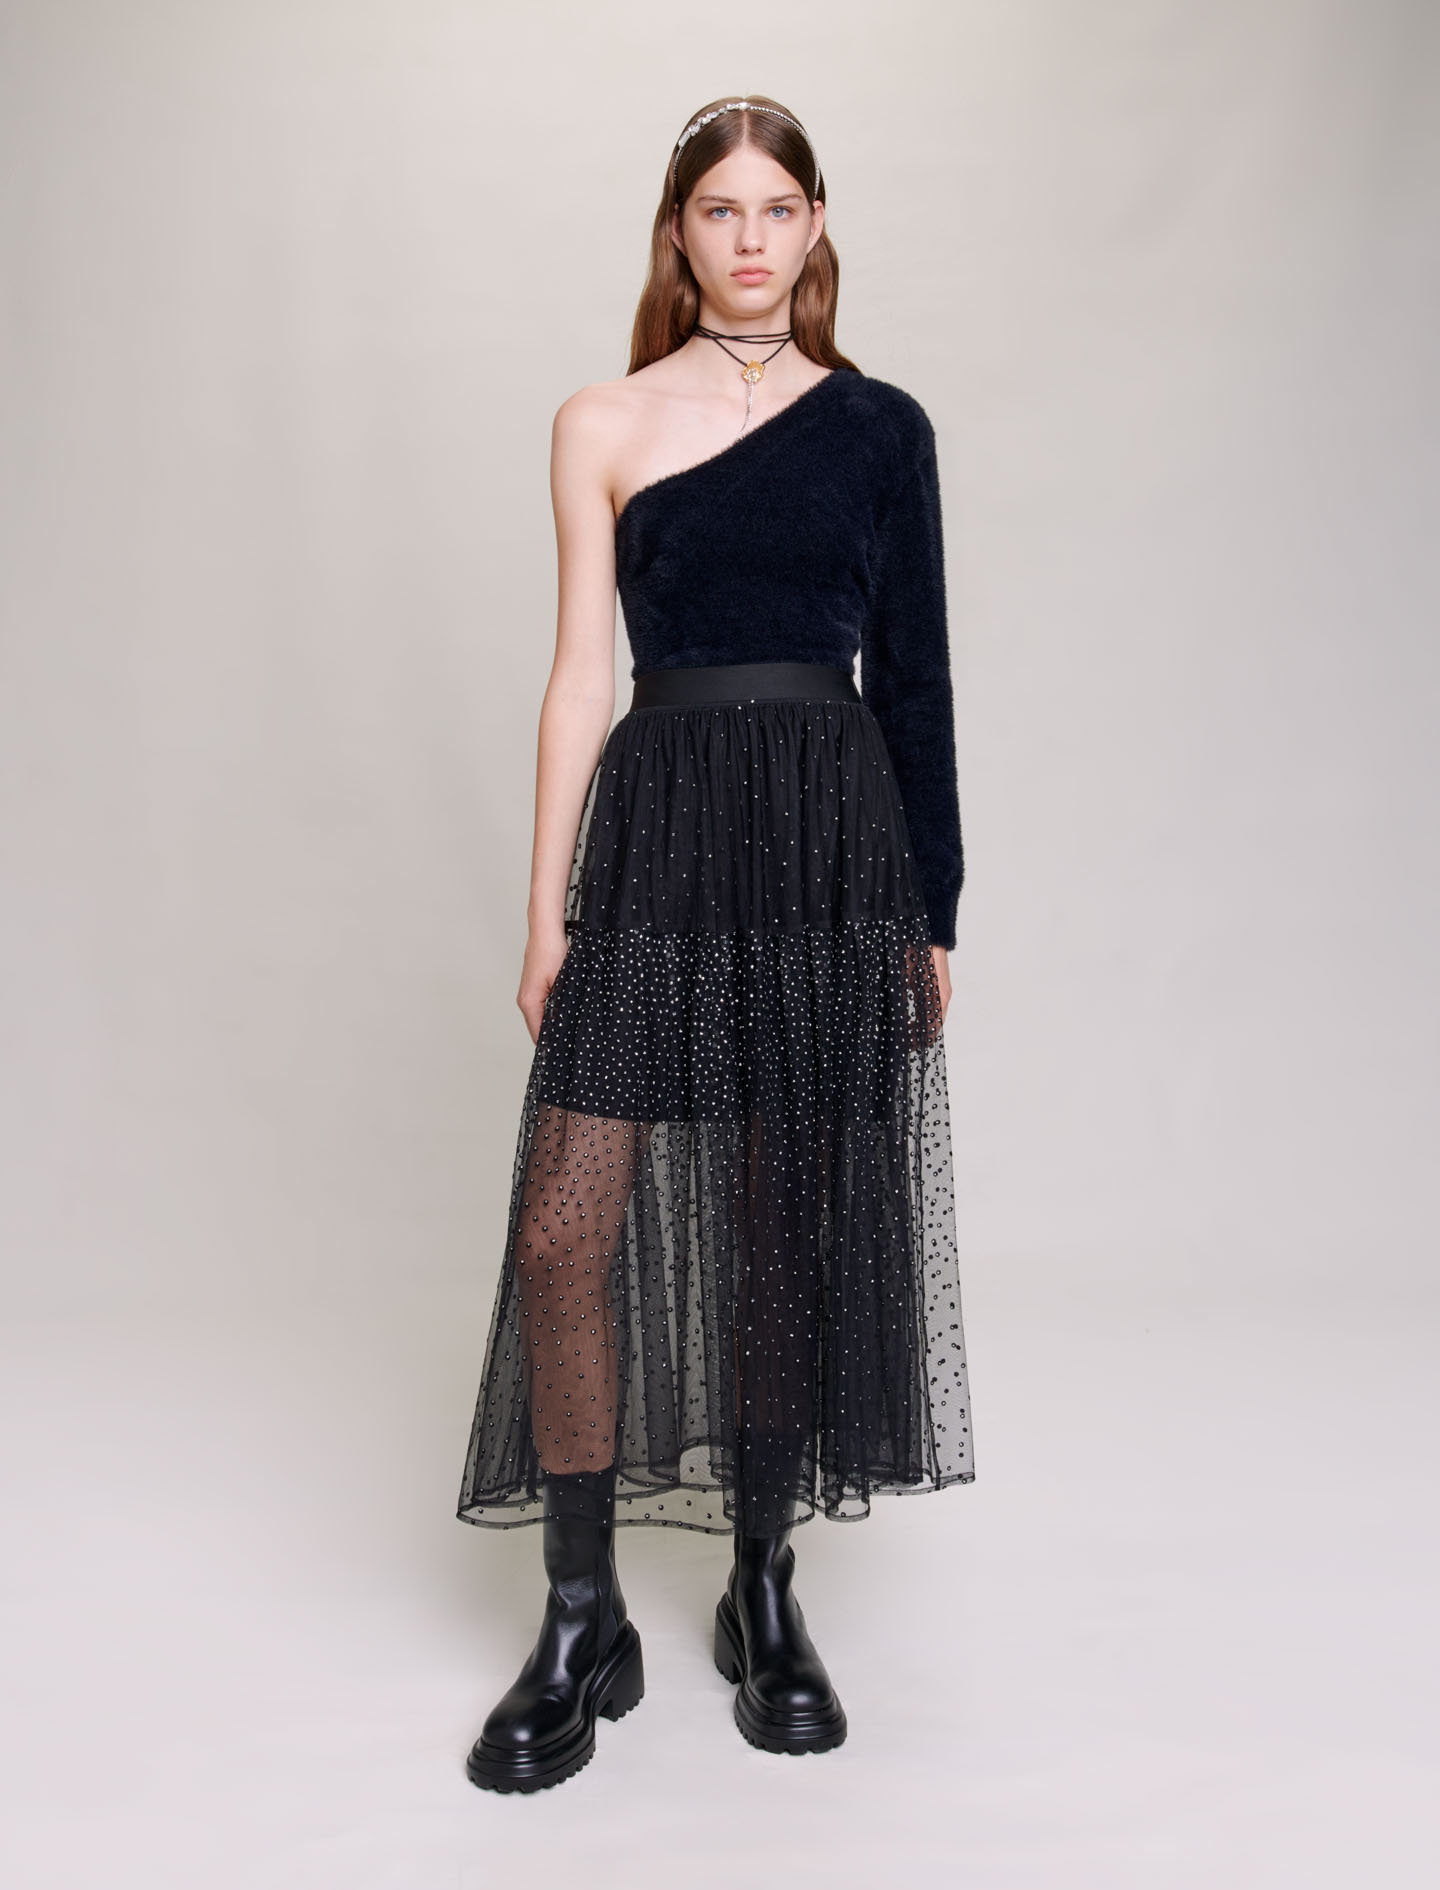 Maje Woman's polyamide Lining: Glittery spotted long tulle skirt for Fall/Winter, in color Black / Black